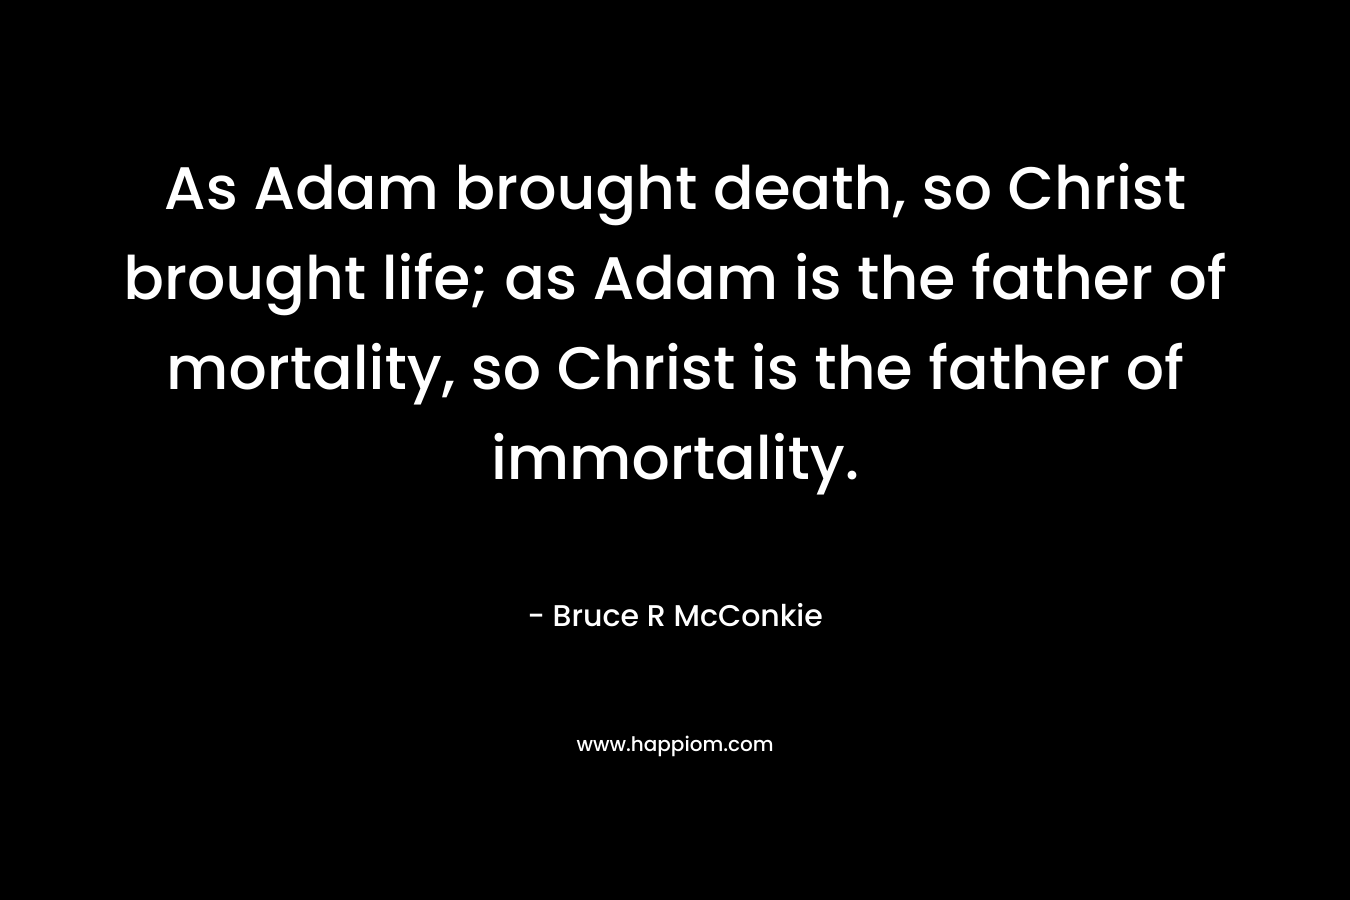 As Adam brought death, so Christ brought life; as Adam is the father of mortality, so Christ is the father of immortality. – Bruce R McConkie